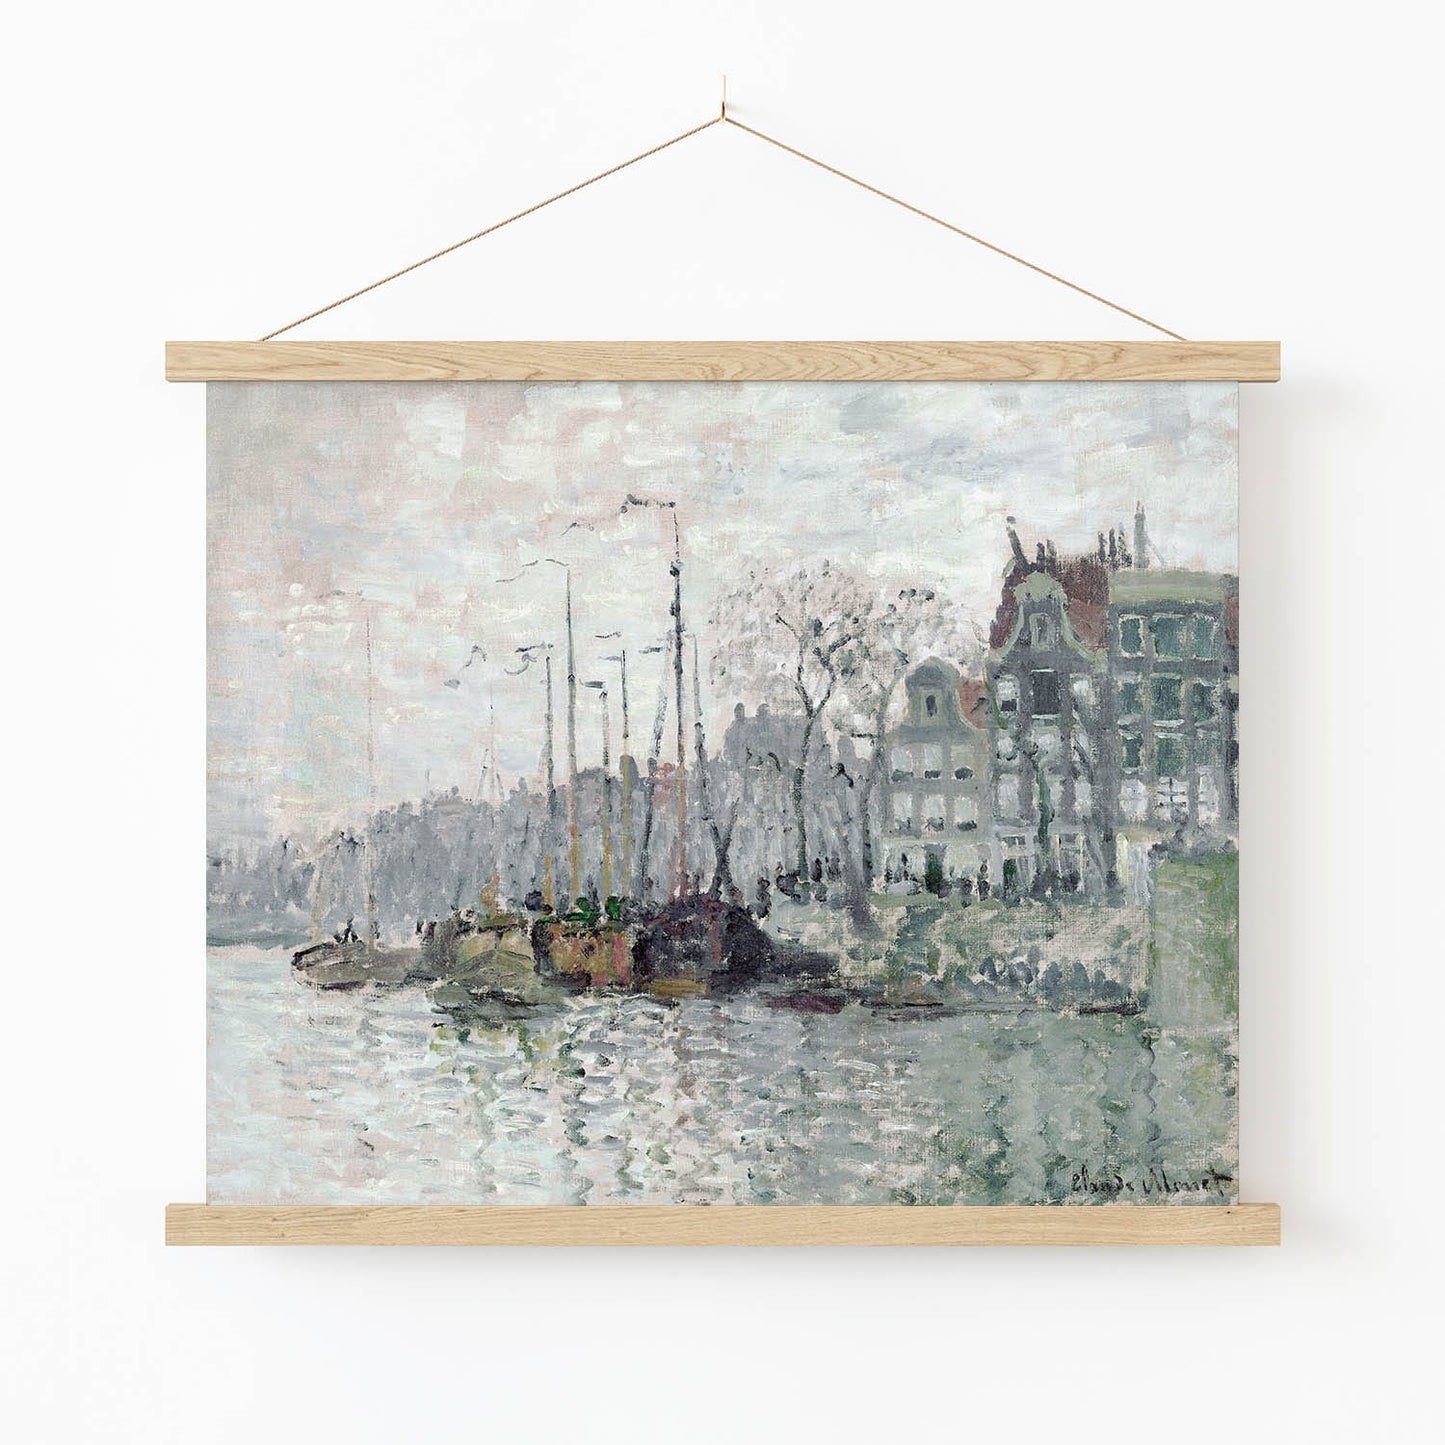 Seascape and City Art Print in Wood Hanger Frame on Wall